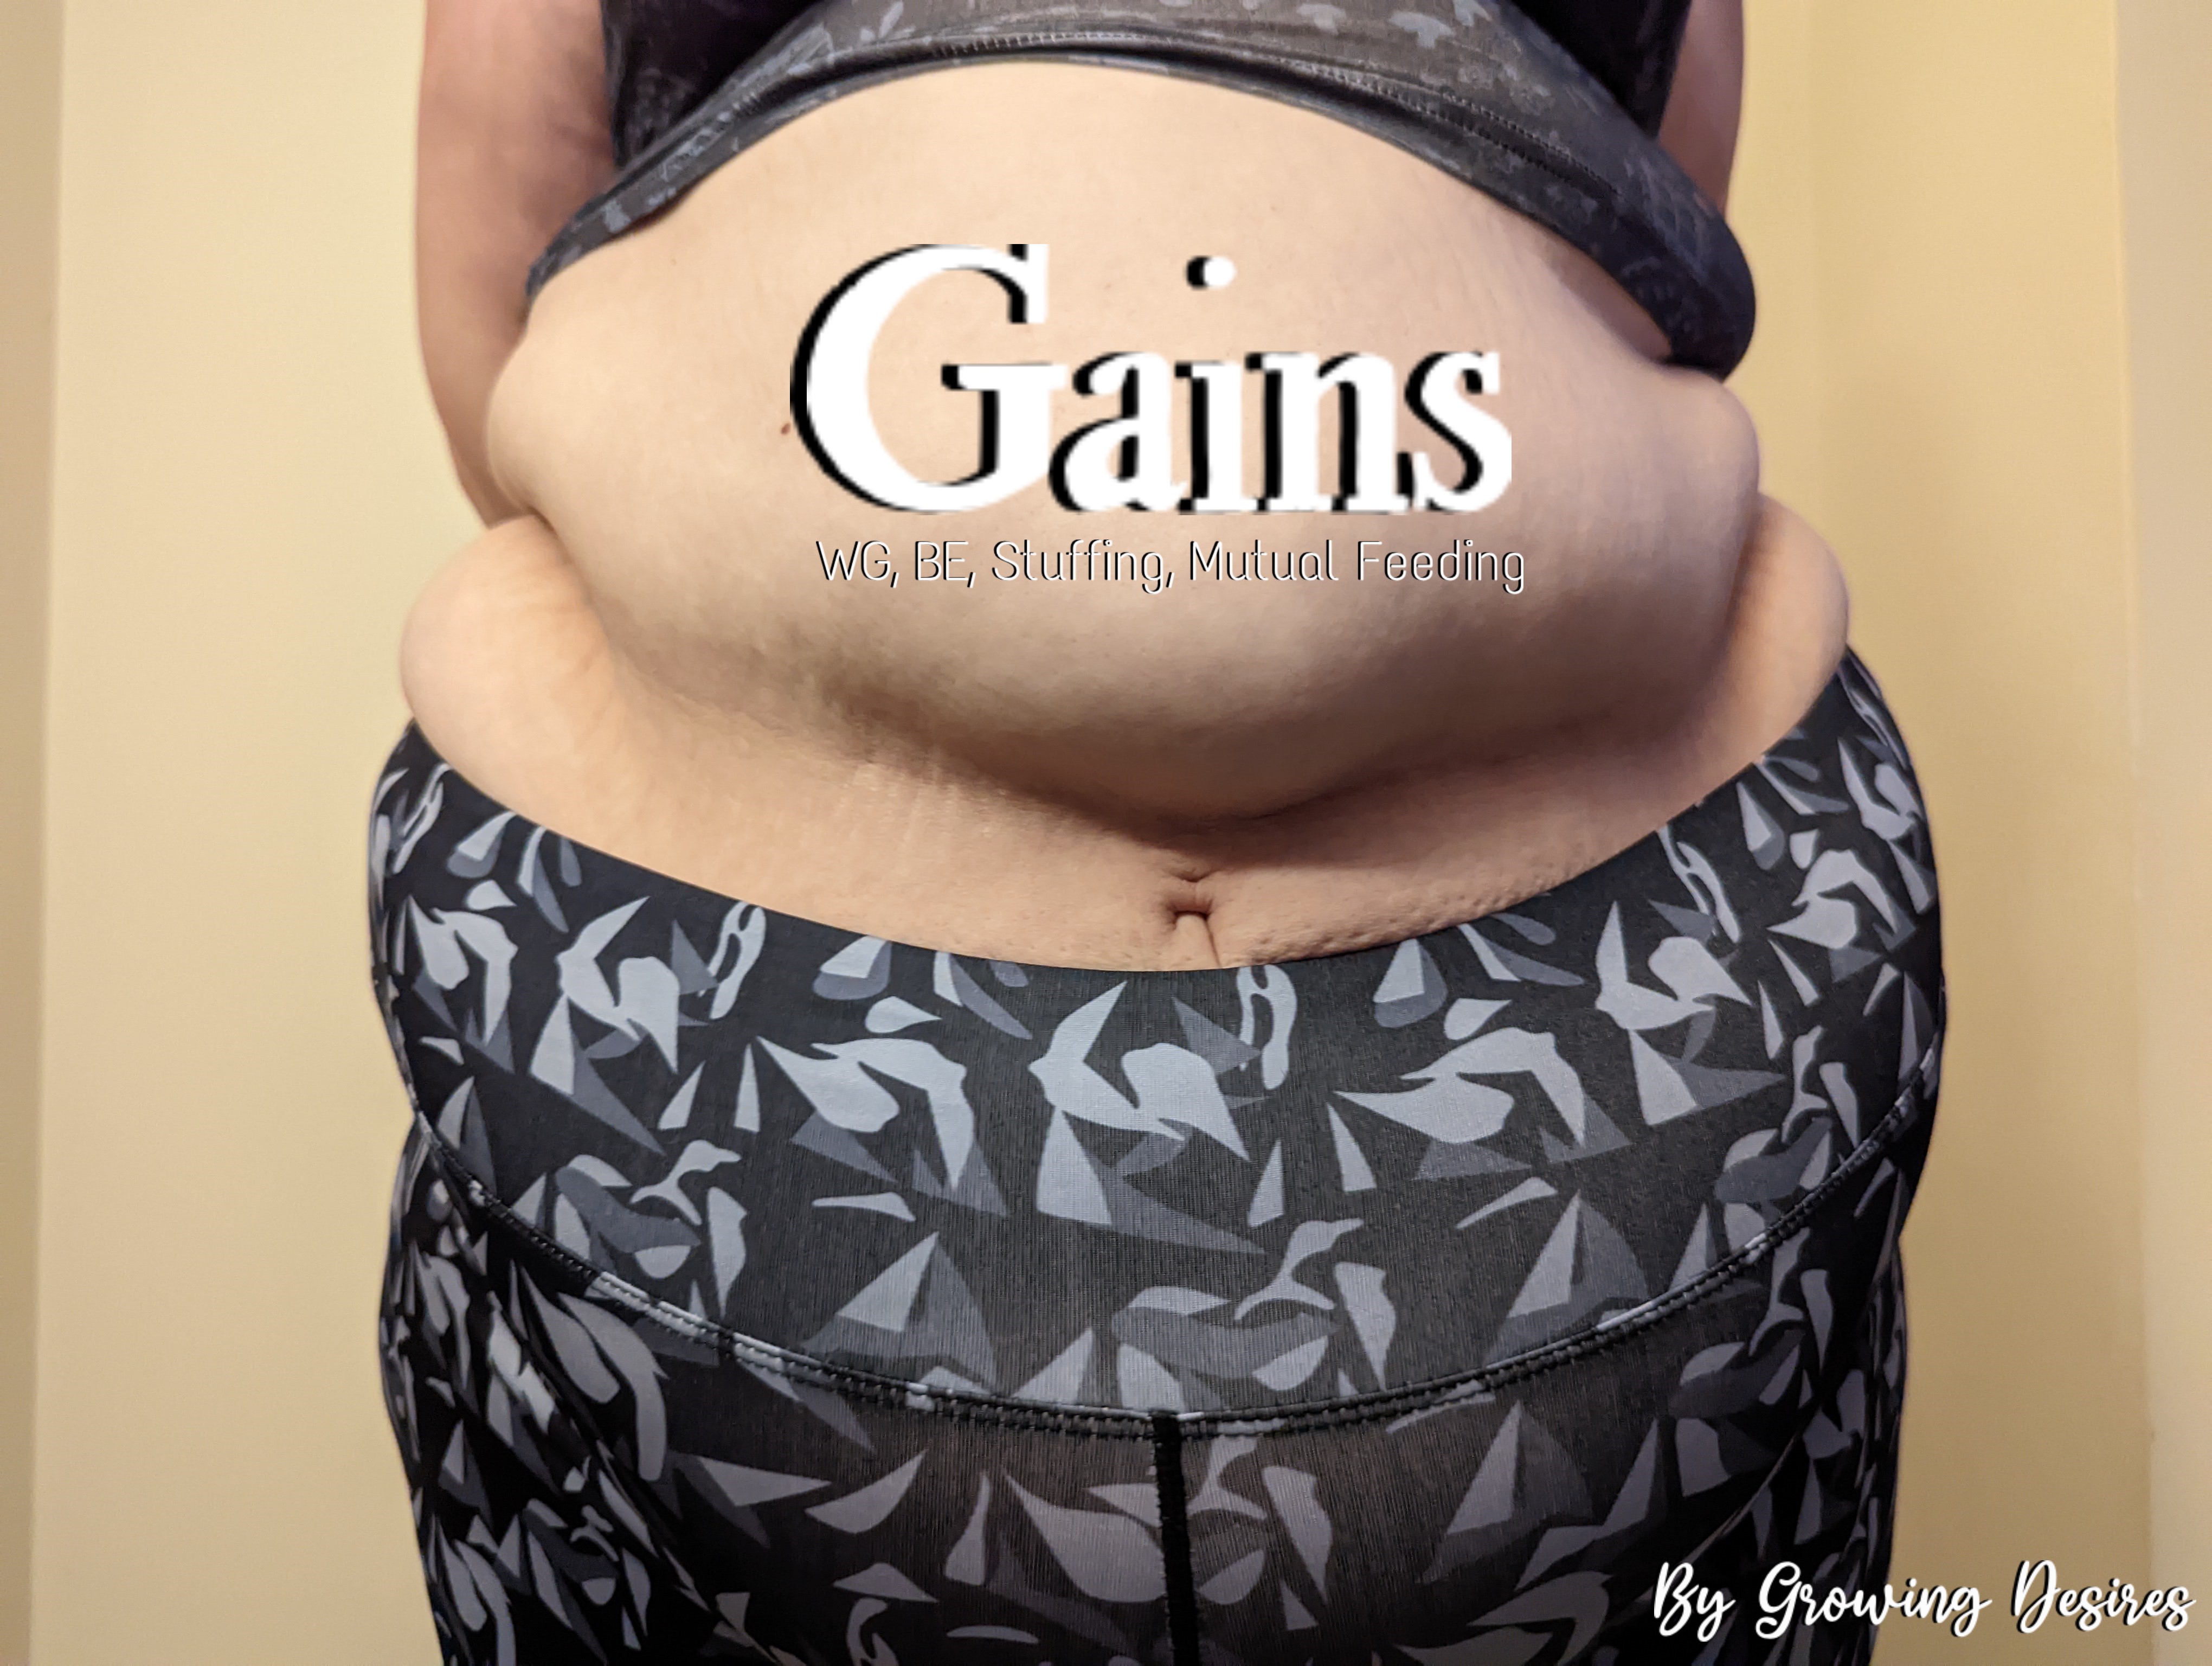 Weight Gain Focused Stories image